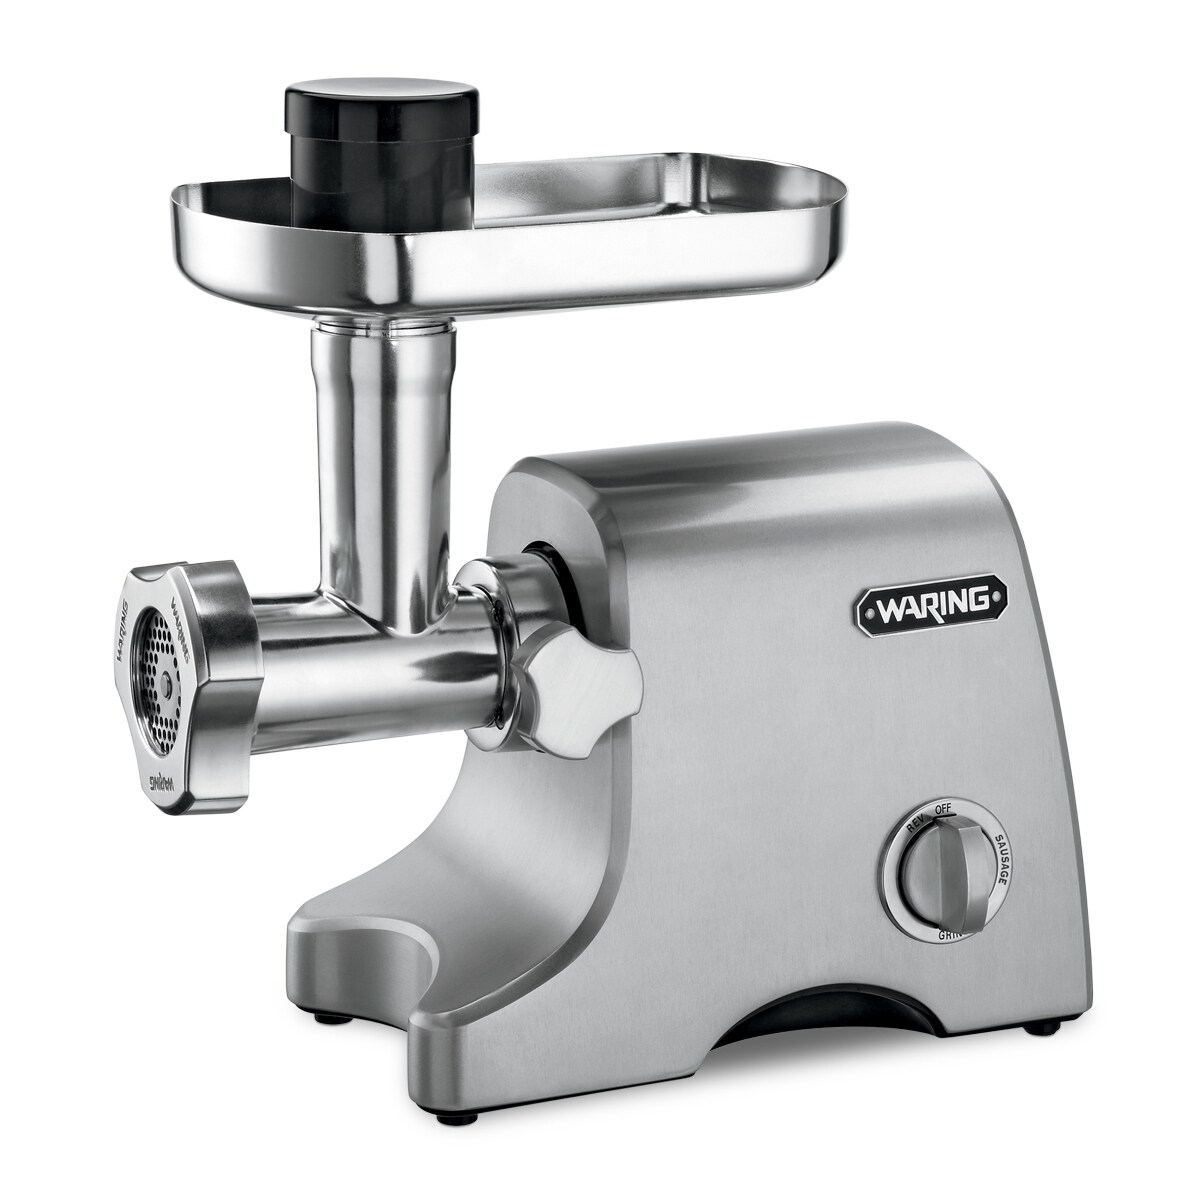 Waring Pro MG1200 Brushed Stainless Steel Professional Meat Grinder